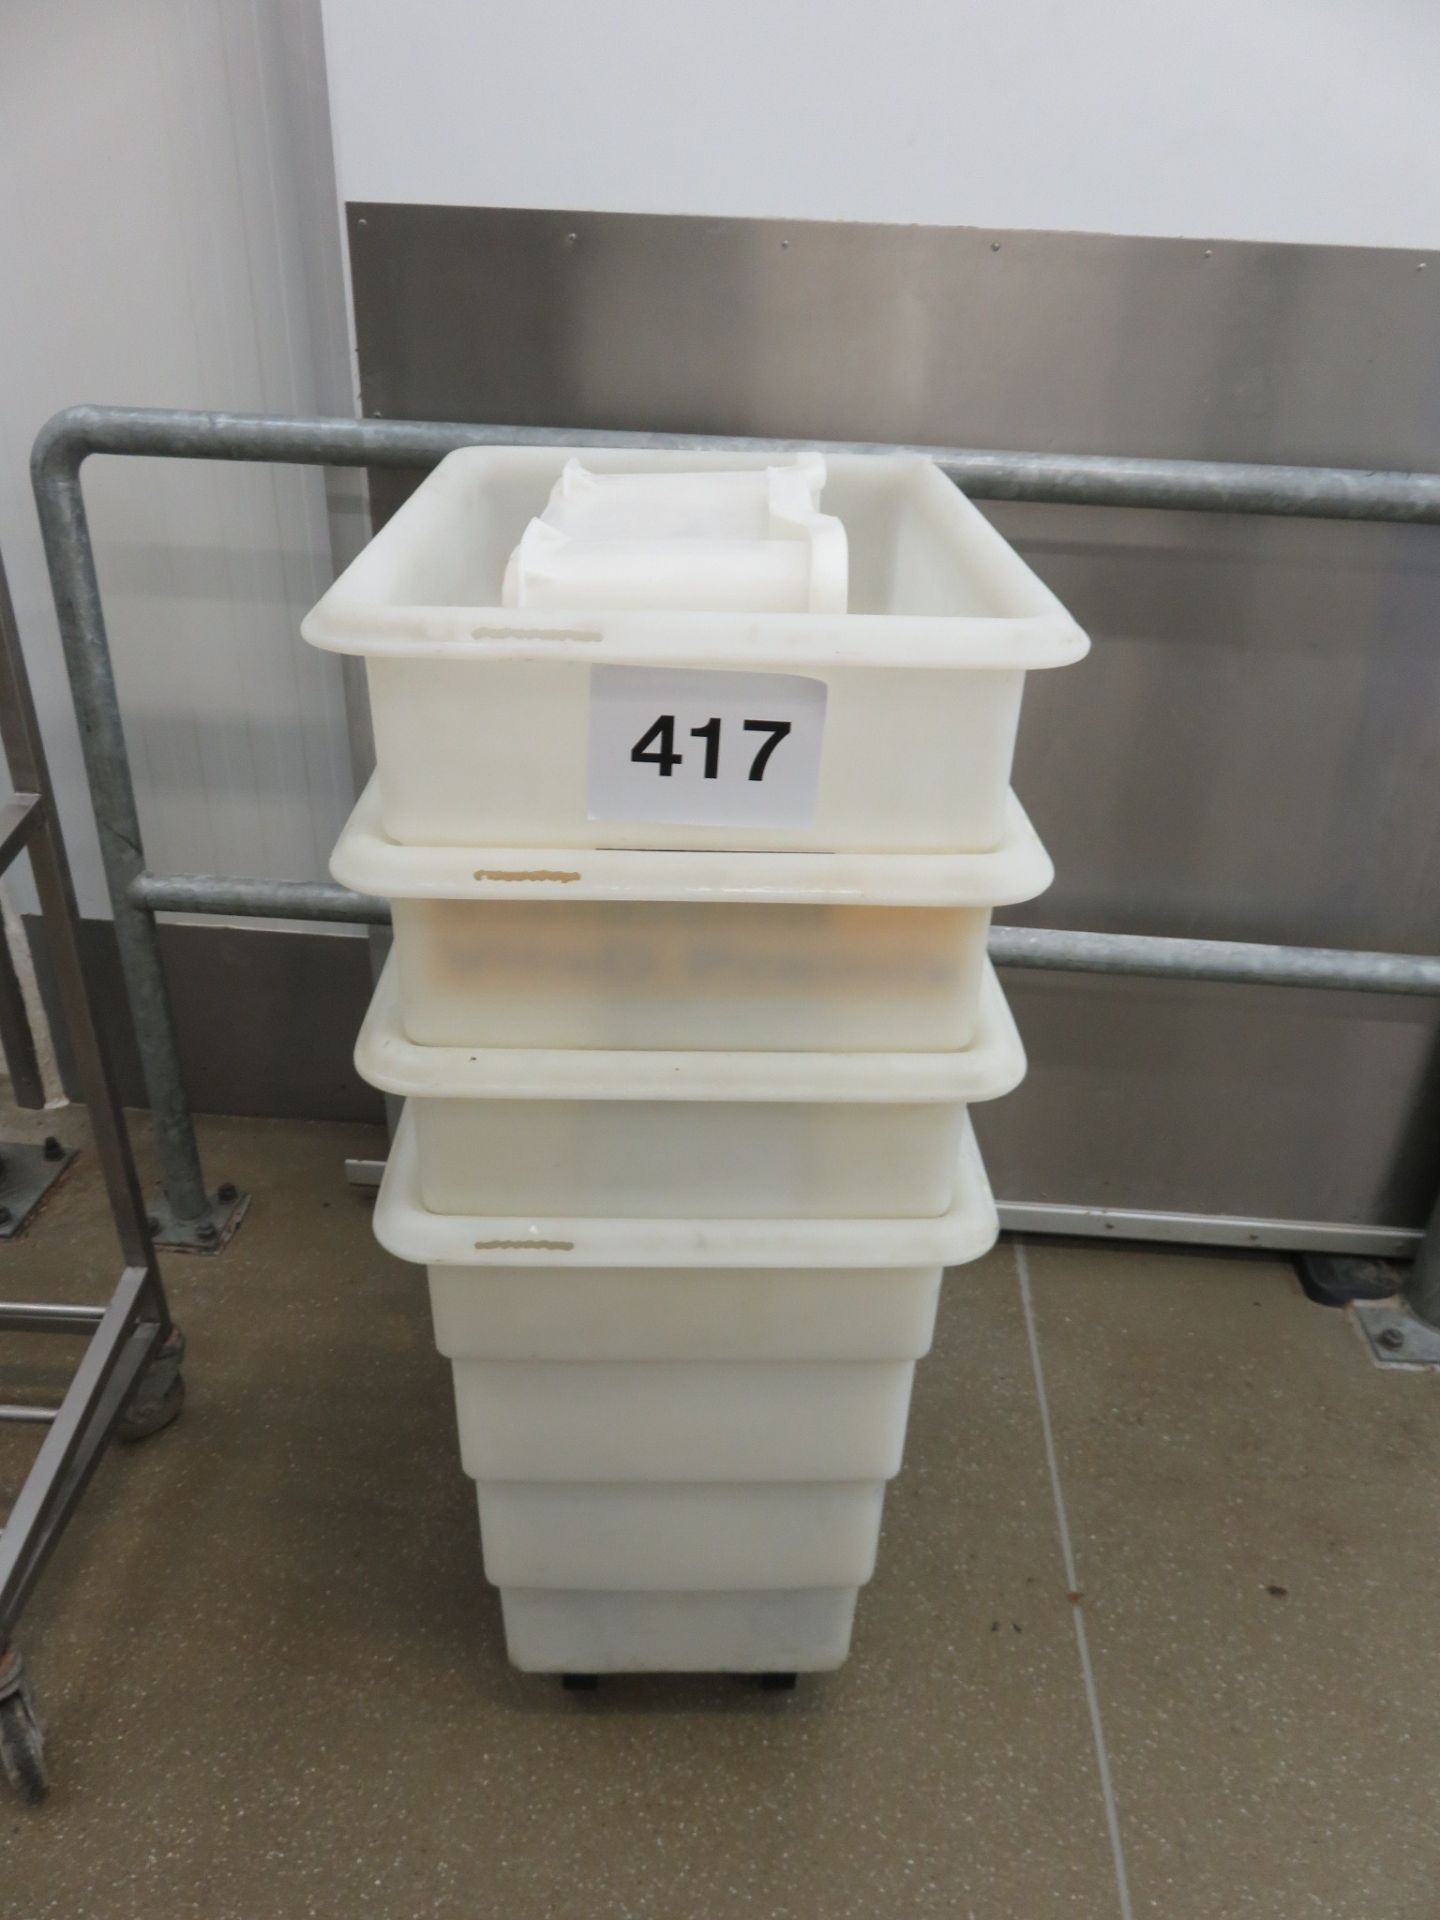 5 x plastic Bins on Dollie. Approx. 380mm x 520mm x 600mm deep. Lift out charge £10